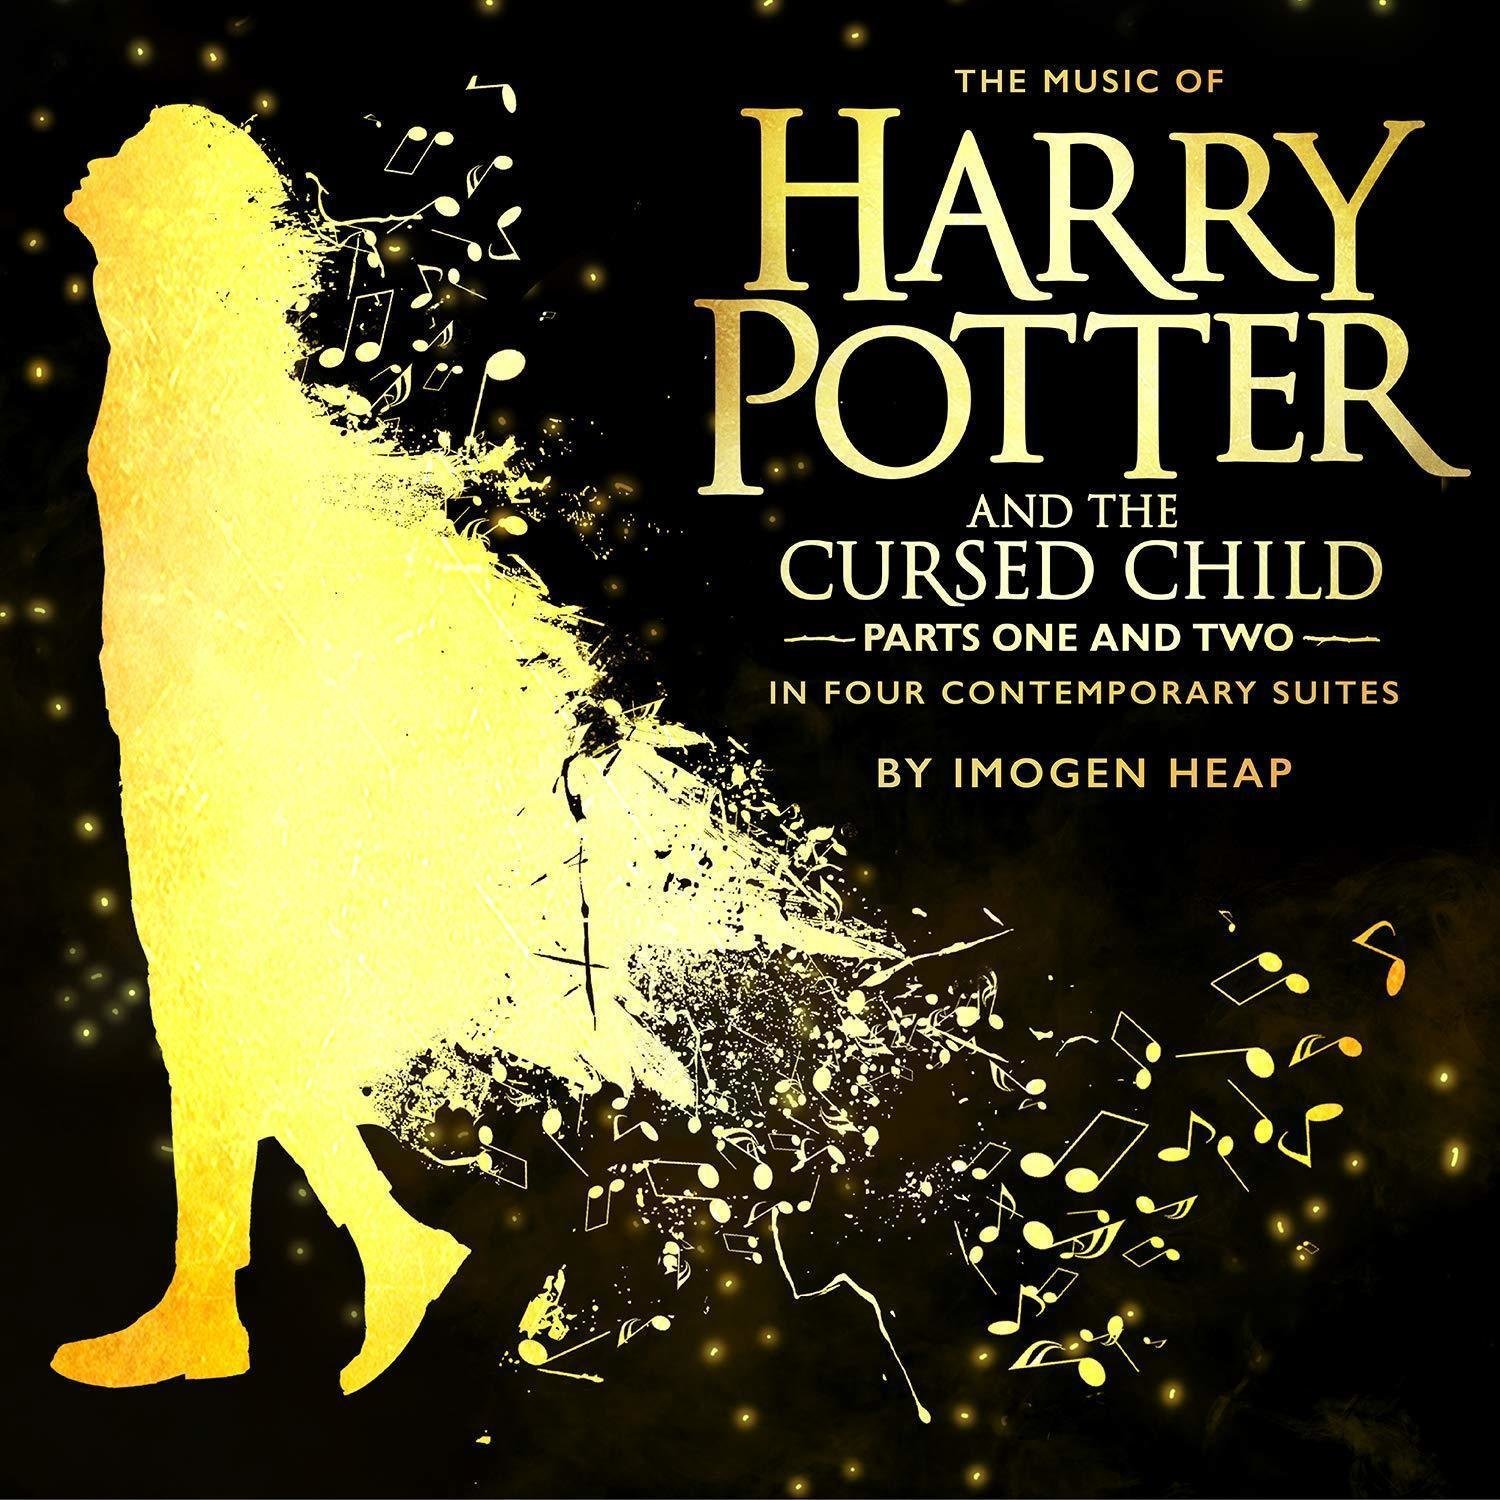 Vinylplade Imogen Heap Music of Harry Potter and the Cursed Child - In Four Contemporary Suites (2 LP)